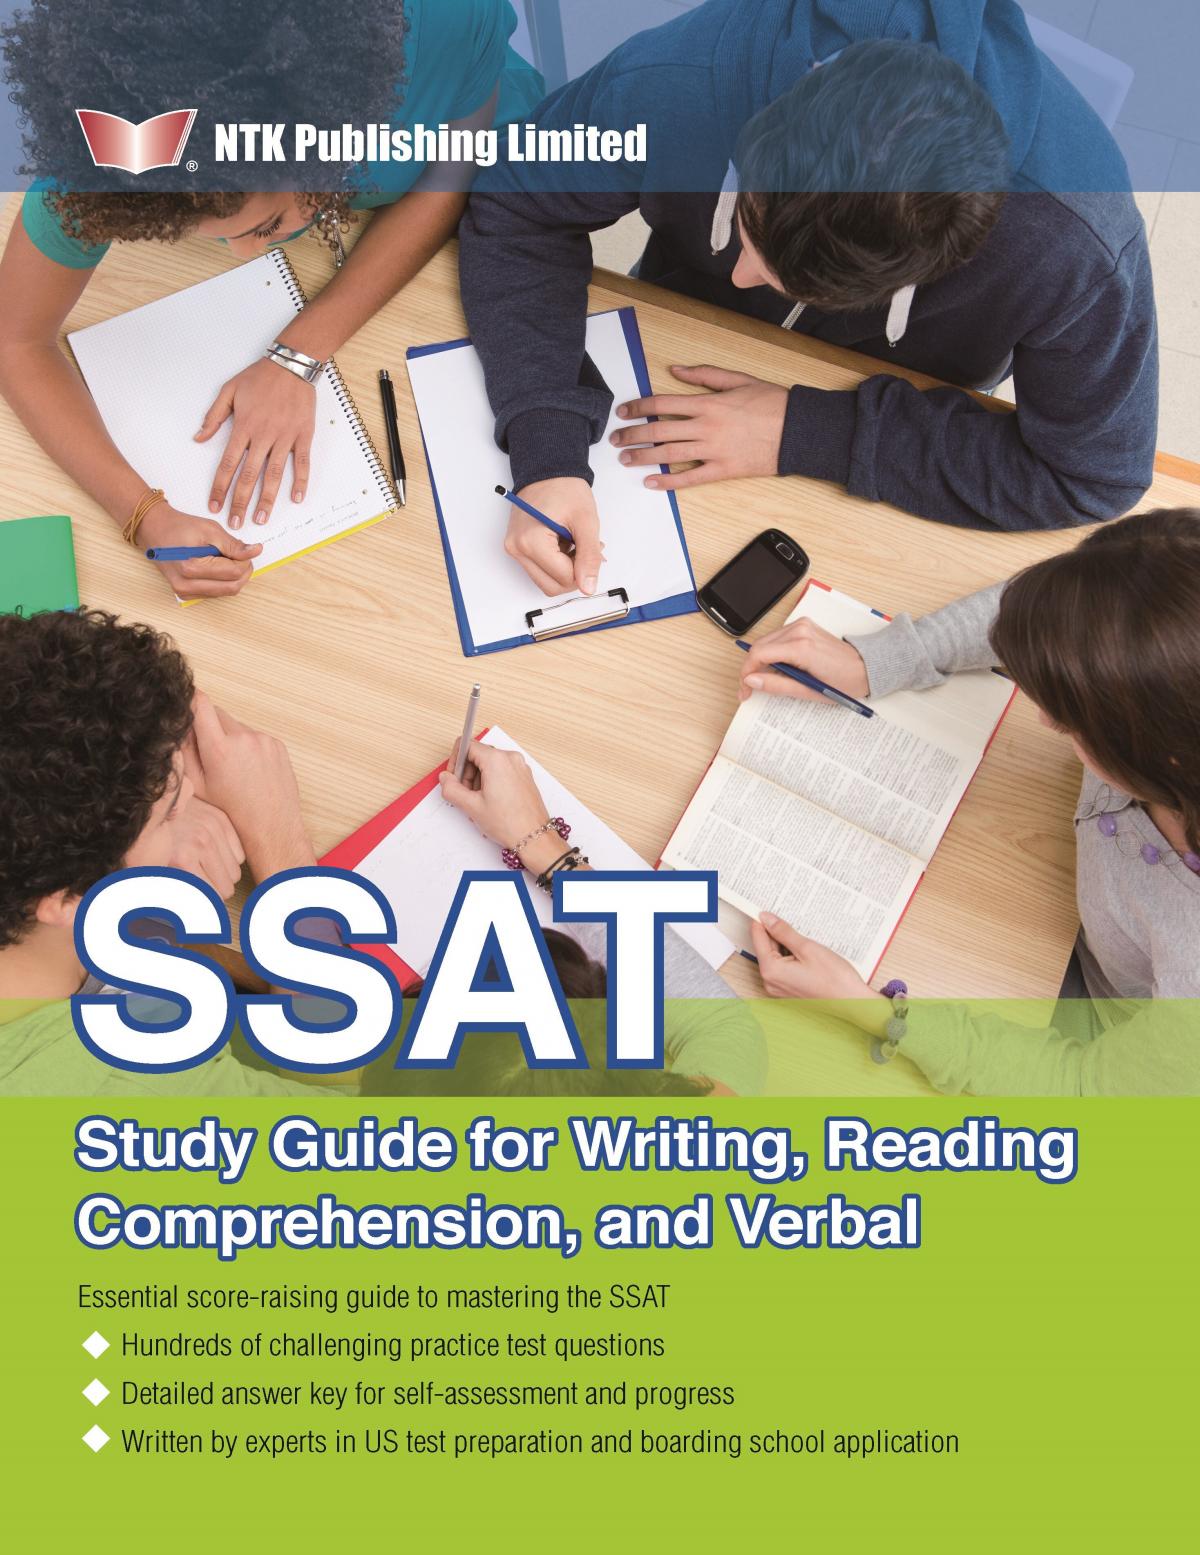 SSAT Study Guide for Writing, Reading Comprehension, and Verbal